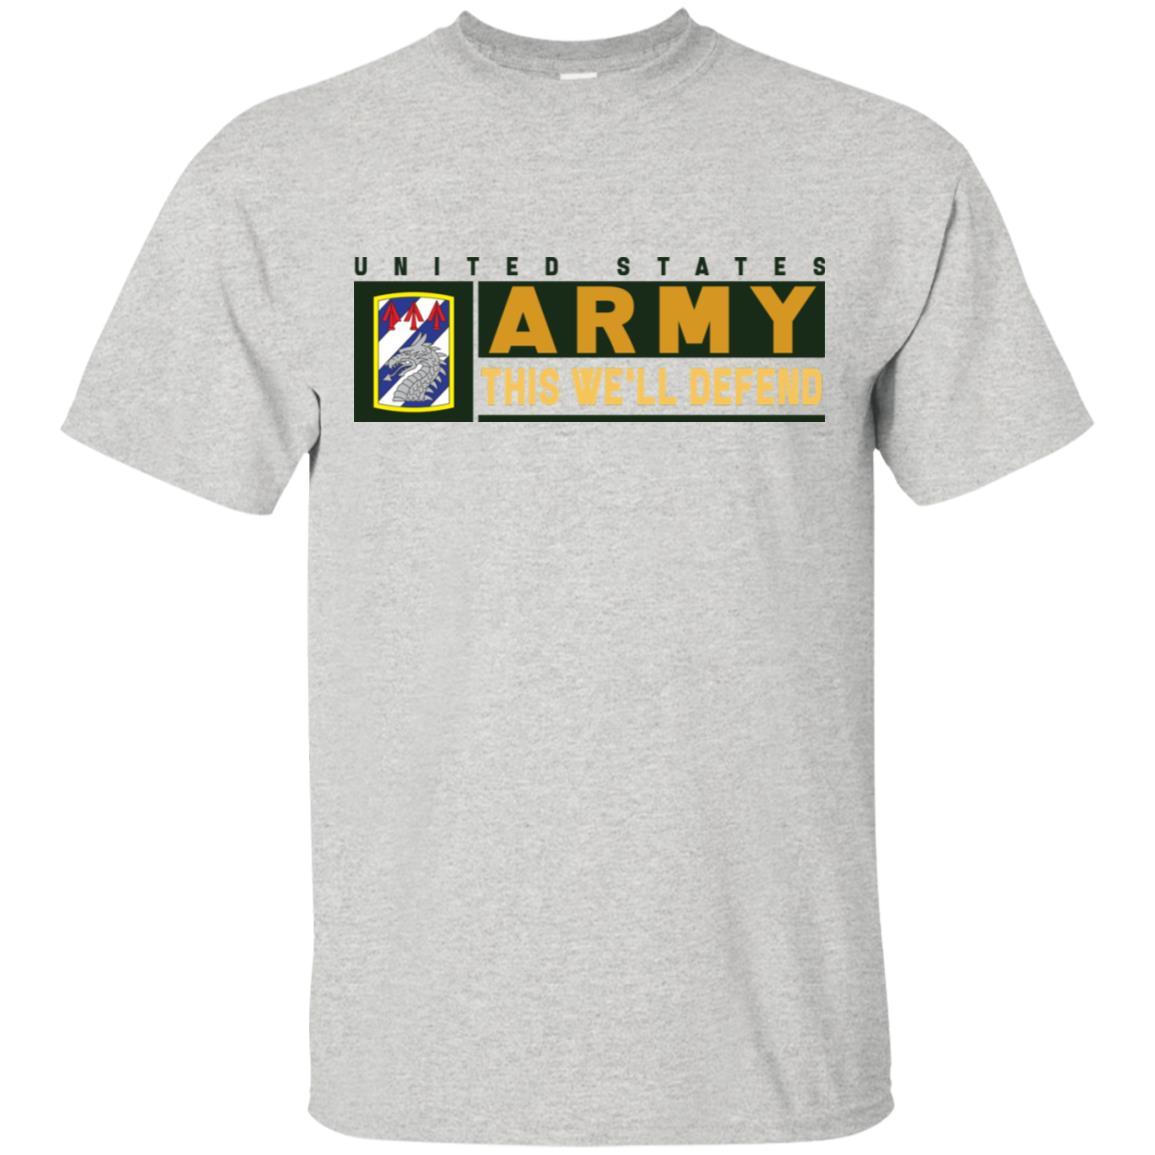 US Army 3RD SUSTAINMENT BRIGADE- This We'll Defend T-Shirt On Front For Men-TShirt-Army-Veterans Nation